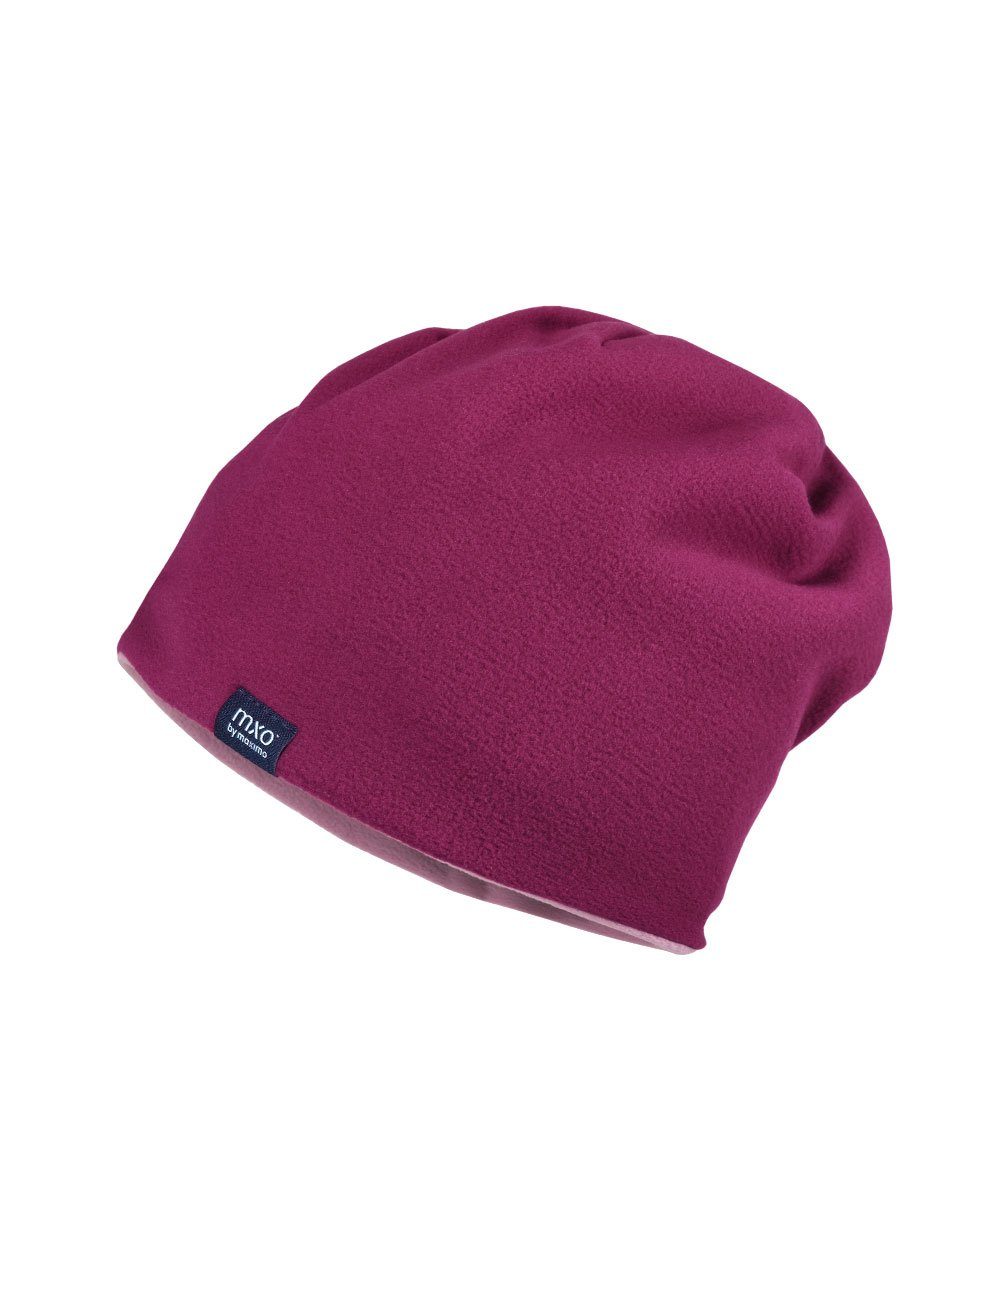 two-one Fleece in brombeere/lilas Beanie MAXIMO Made Germany Beanie,